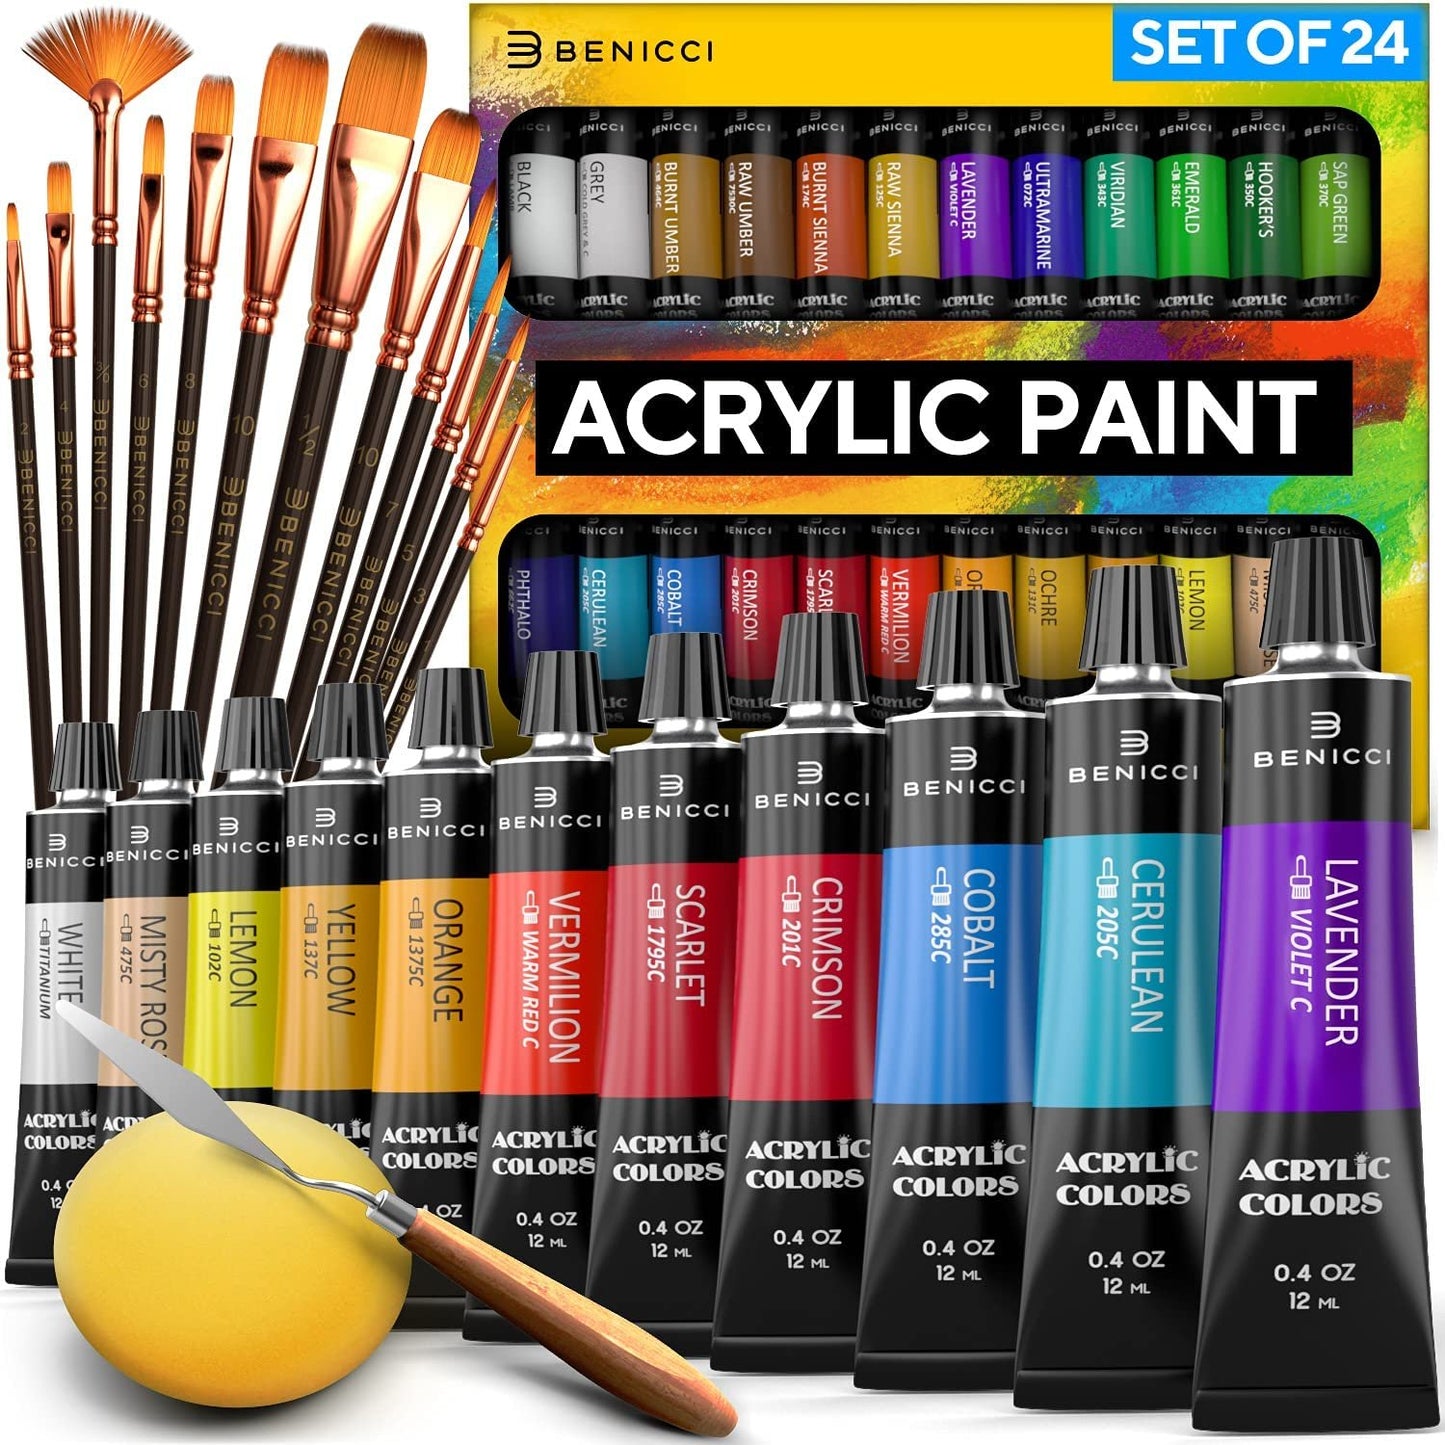 Premium Quality Acrylic Paint Set 24 Colors - 1.28Oz (38ml) - with 6 Nylon Brushes - Safe for Kids & Adults - Perfect Kit for Beginners, Pros & Artist